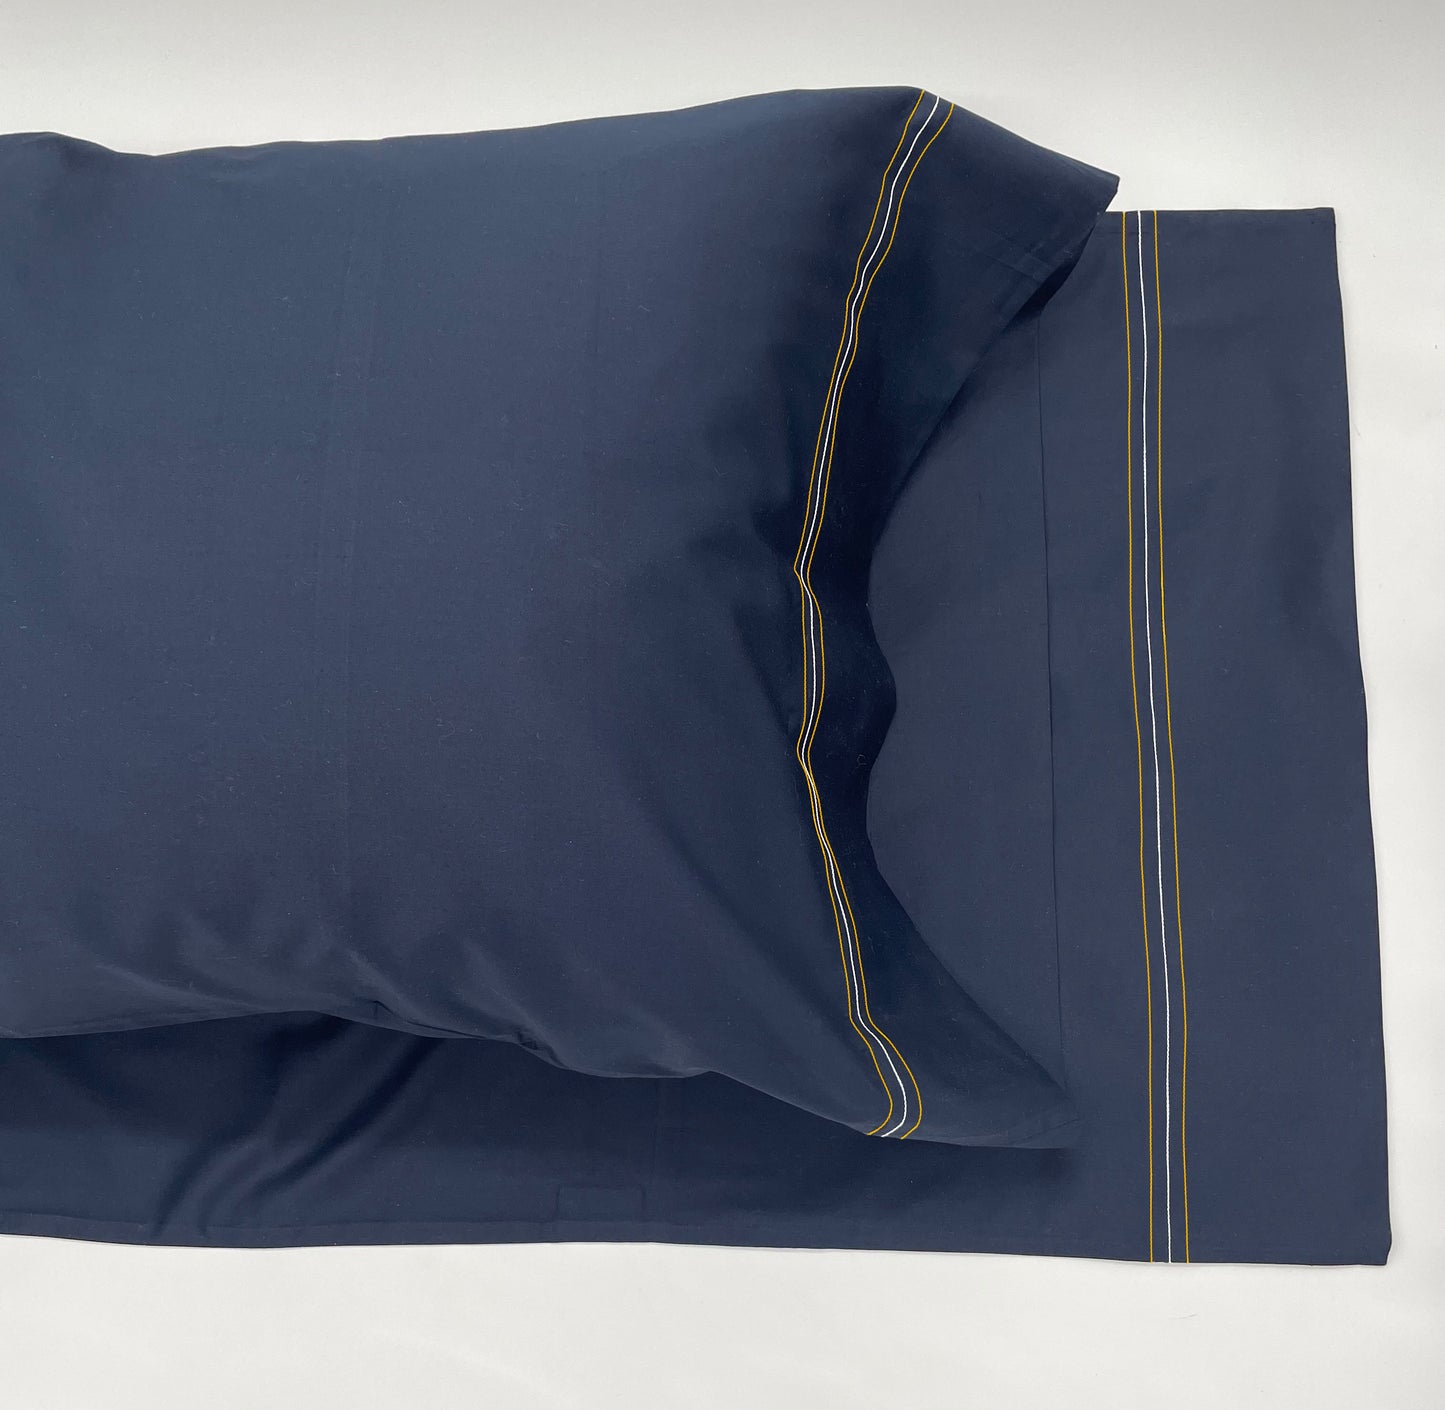 Narragansett Deep Sea Pillow Case with a triple contrasting stitch in Yellow, White and Yellow.